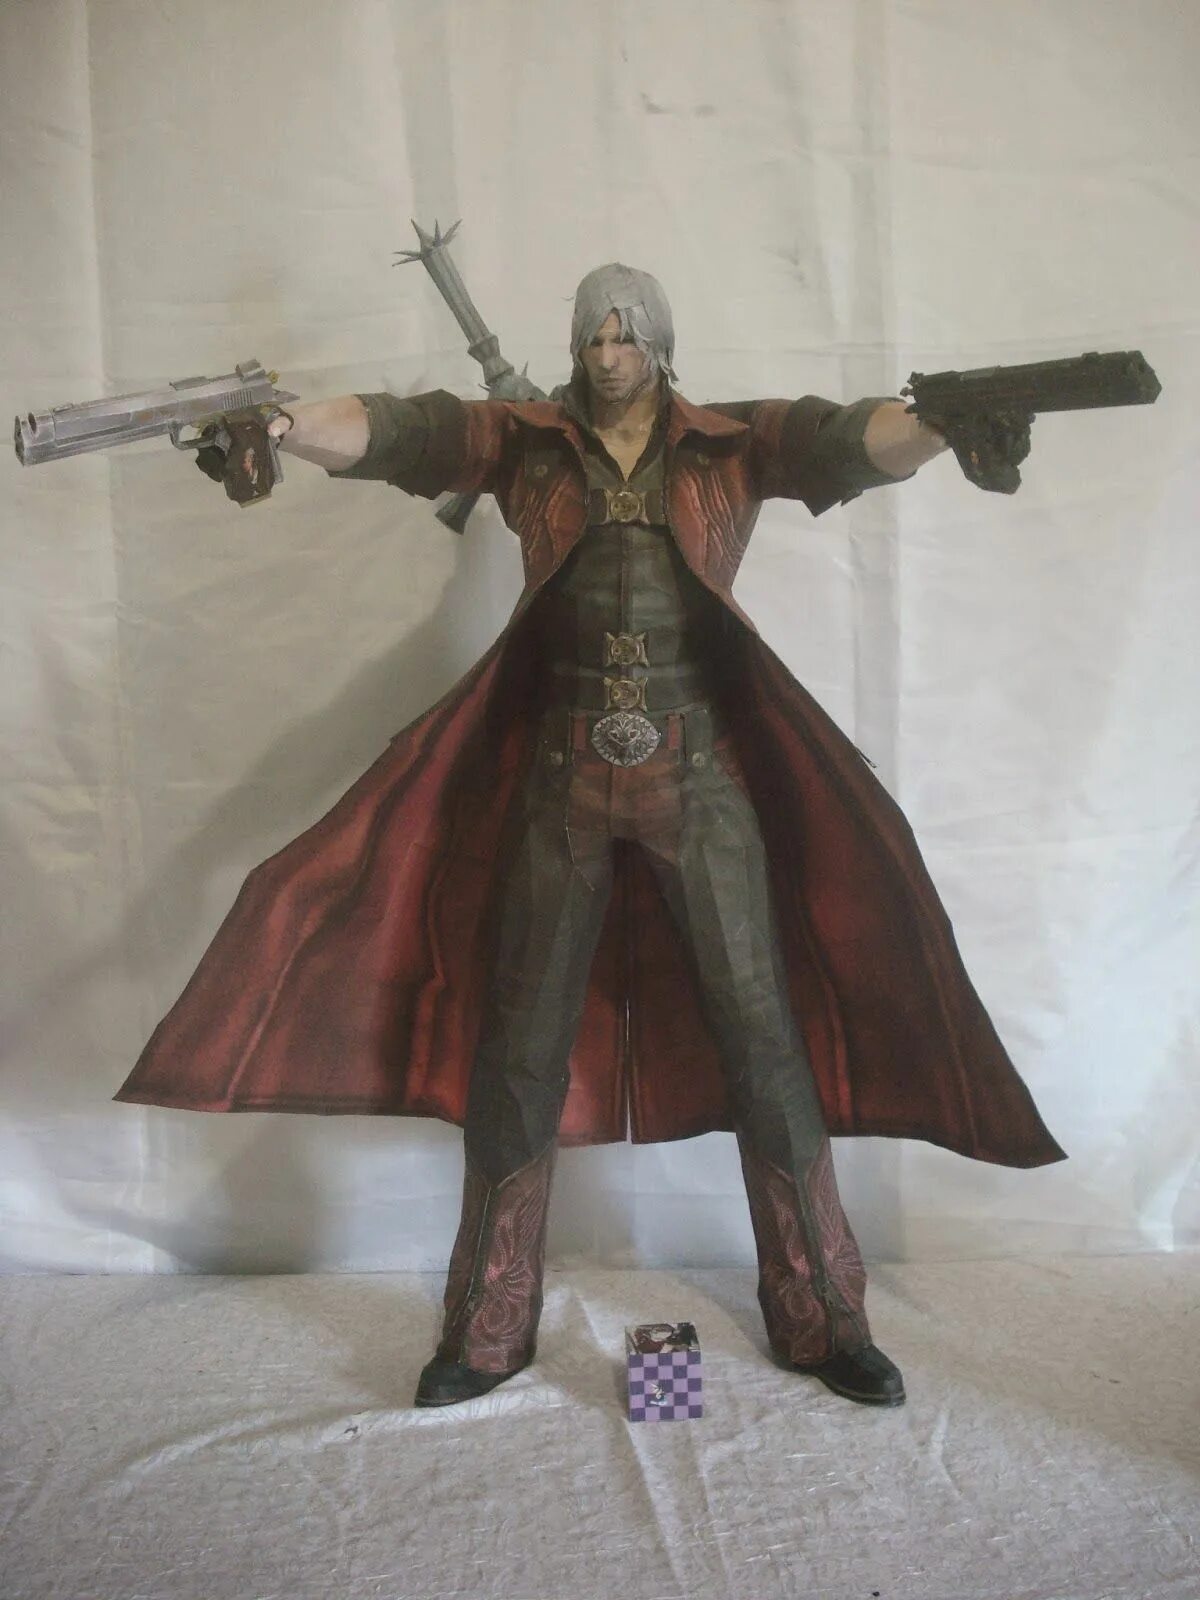 Dante Devil May Cry Papercraft. Devil May Cry Papercraft. Devil May Cry фигурки. Фигурка Данте из Devil May Cry 4. Данте из бумаги